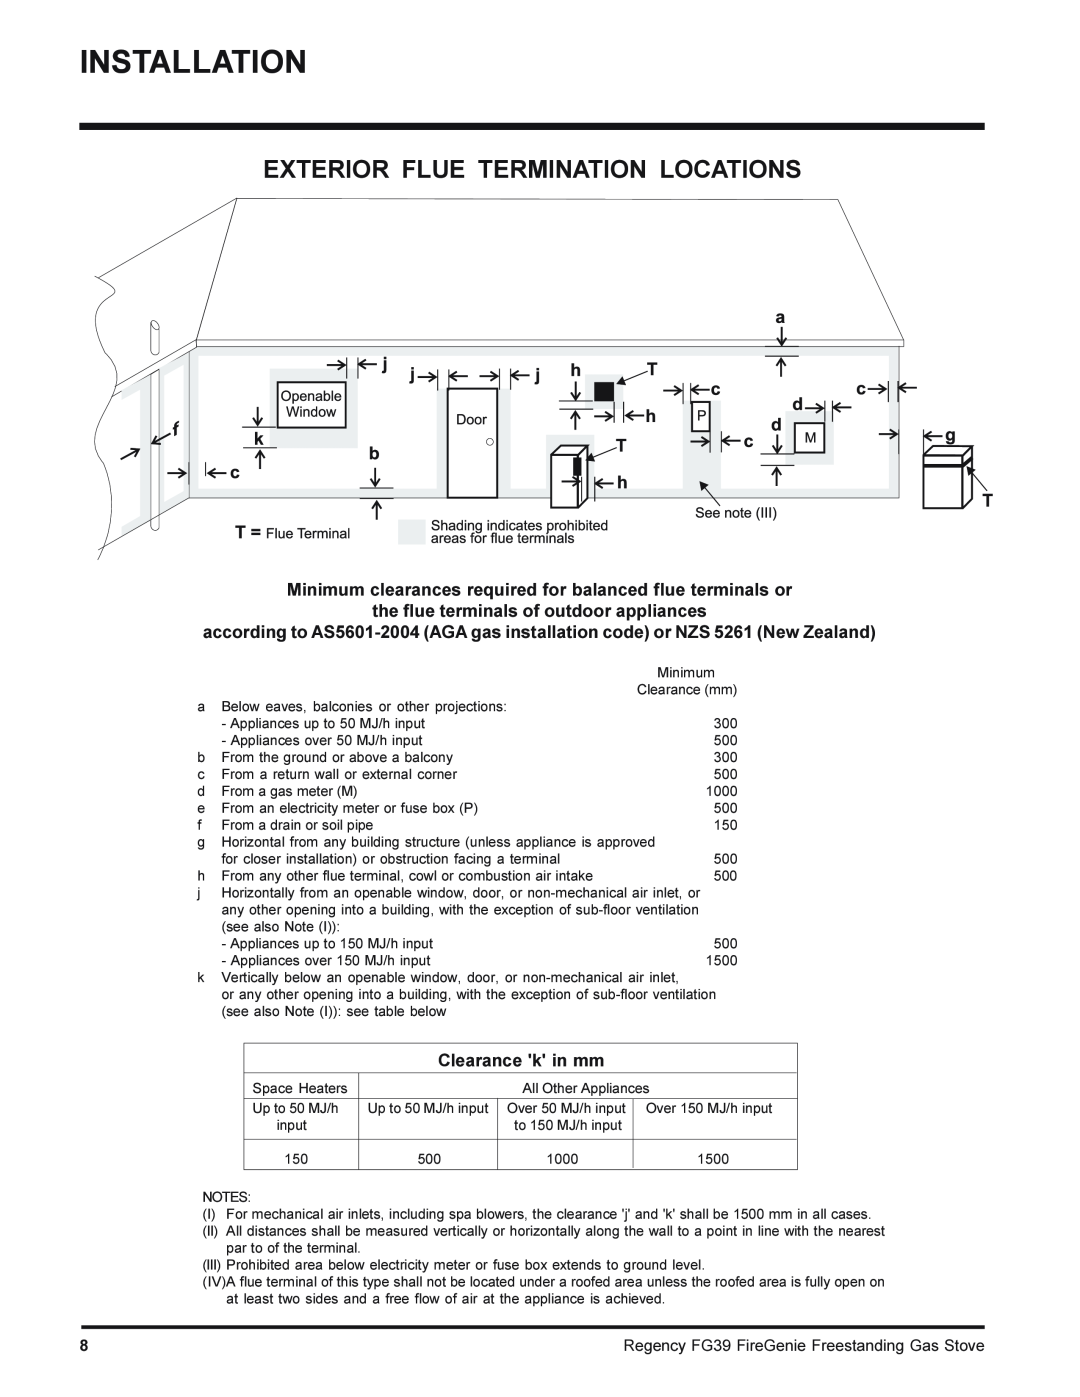 Regency FG39-LPG, FG39-NG Exterior Flue Termination Locations, the flue terminals of outdoor appliances, Clearance k in mm 